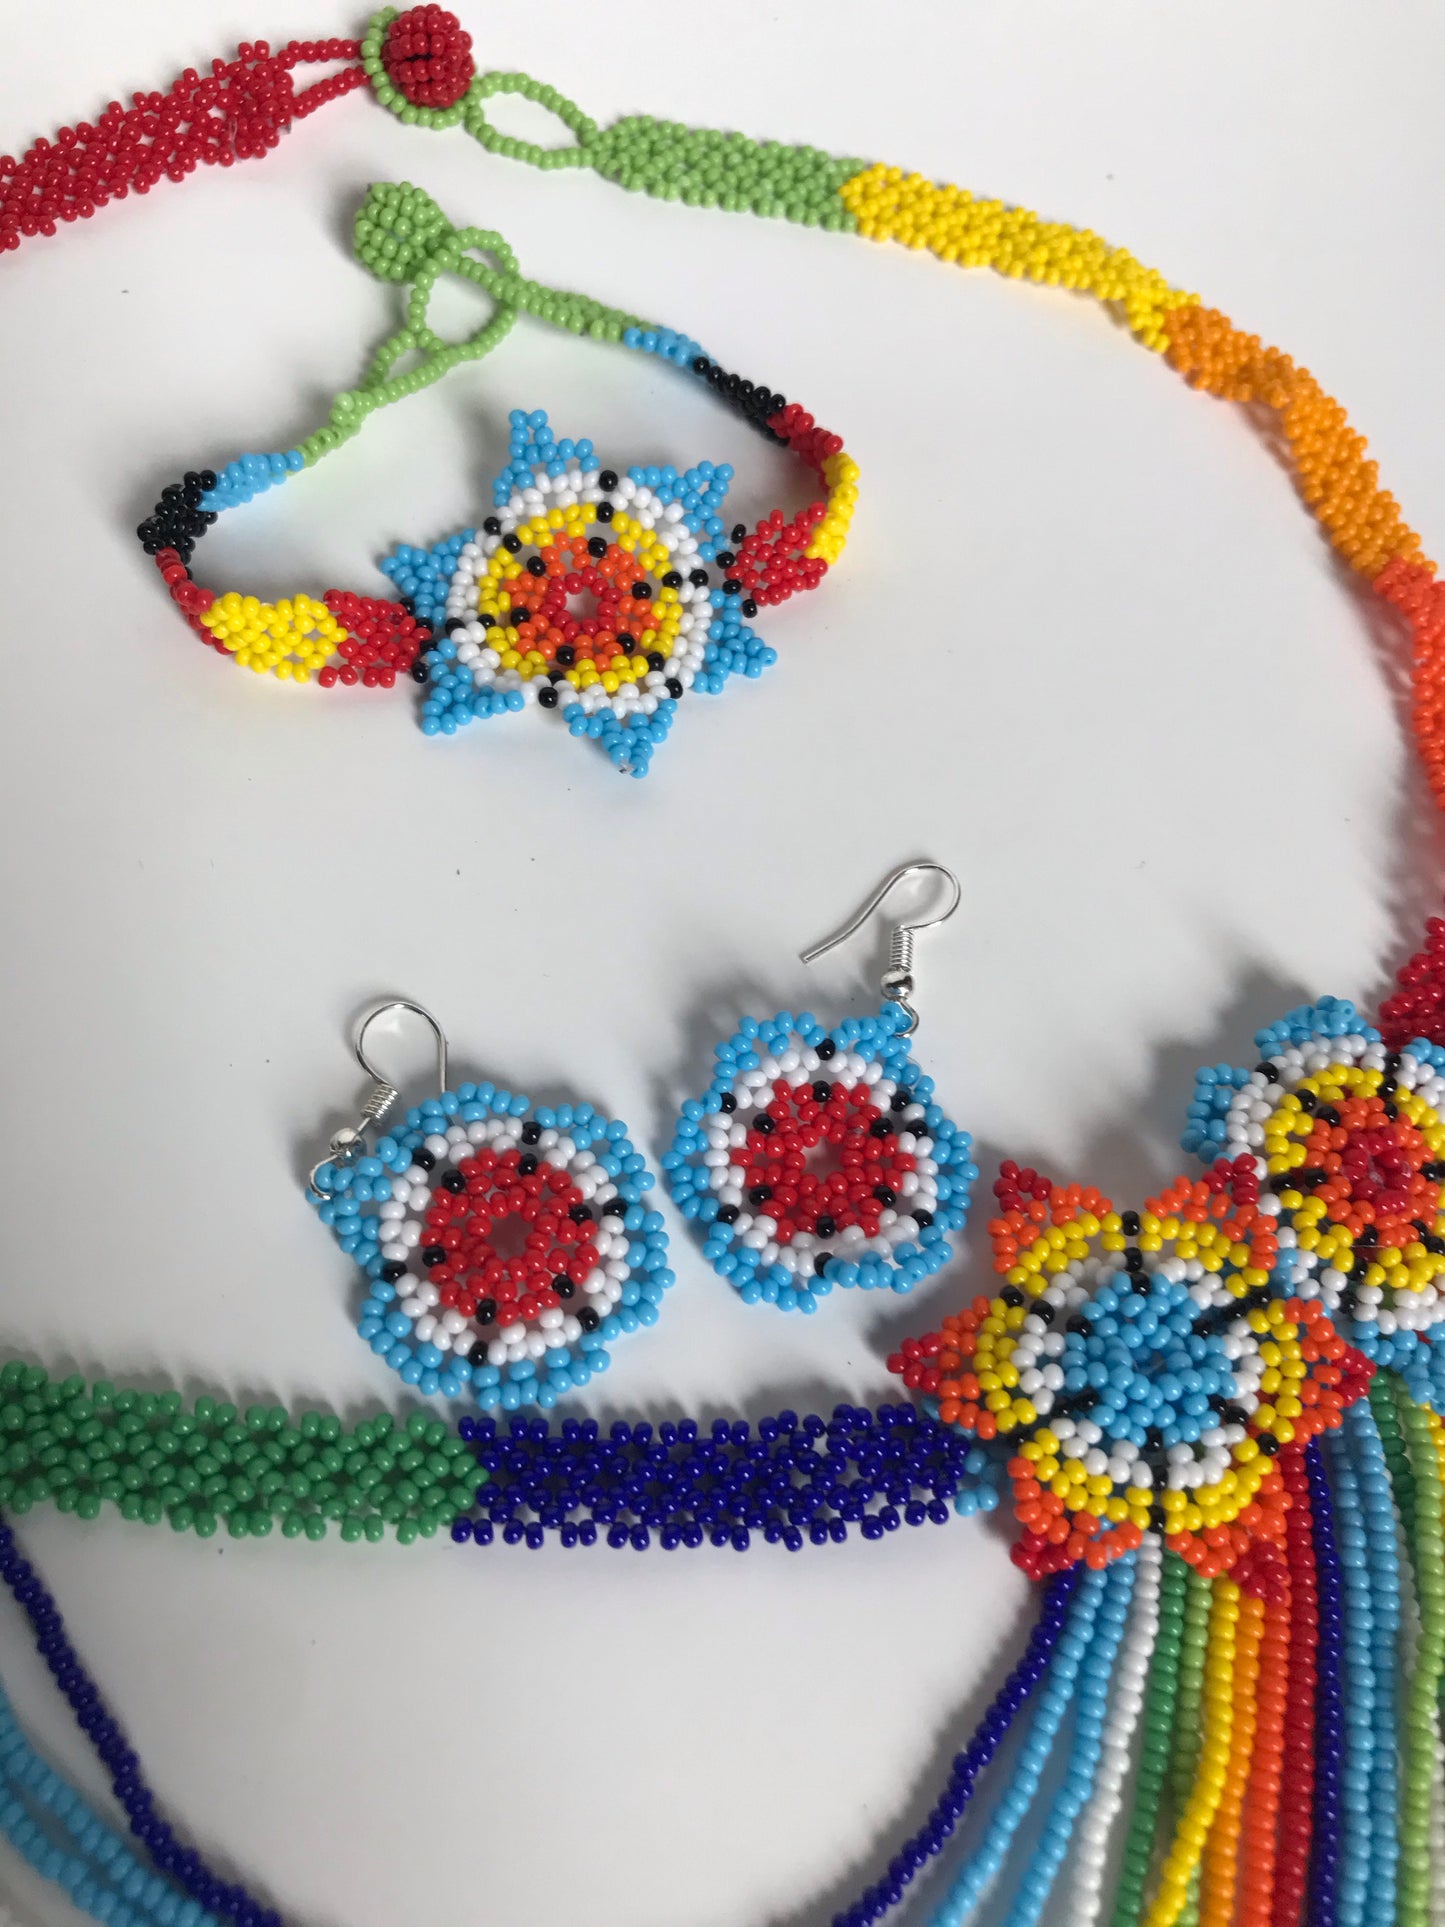 Handcrafted Bead necklace earrings set colorful jewelry